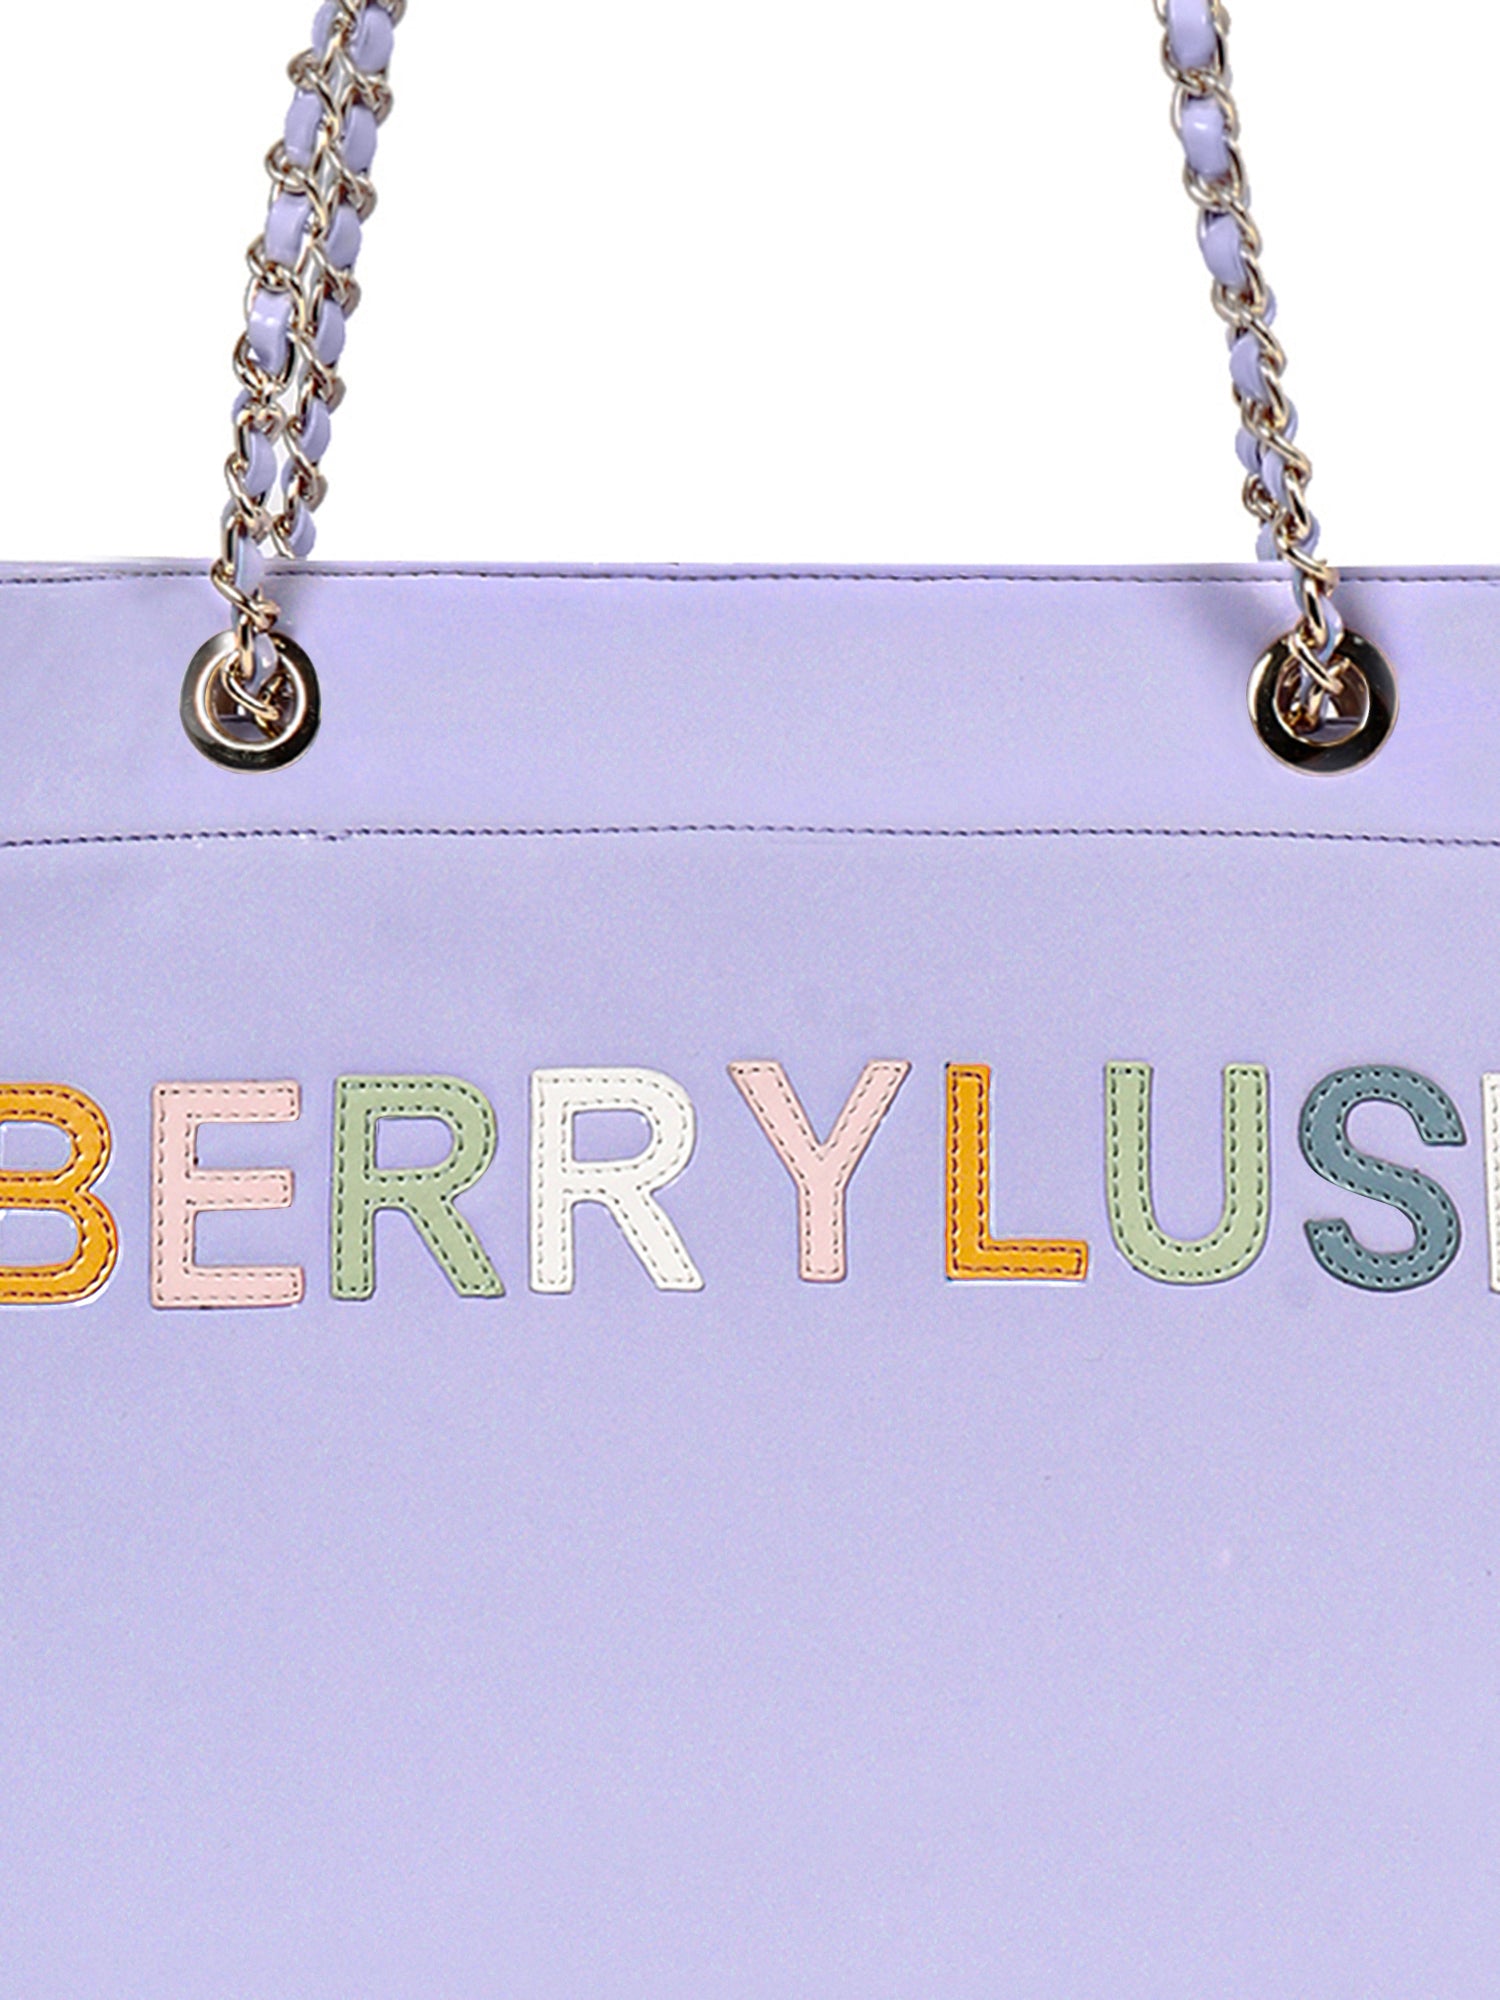 Berrylush Women Purple Typography PU Mobile Pouch Embellished Oversized Tote Bag